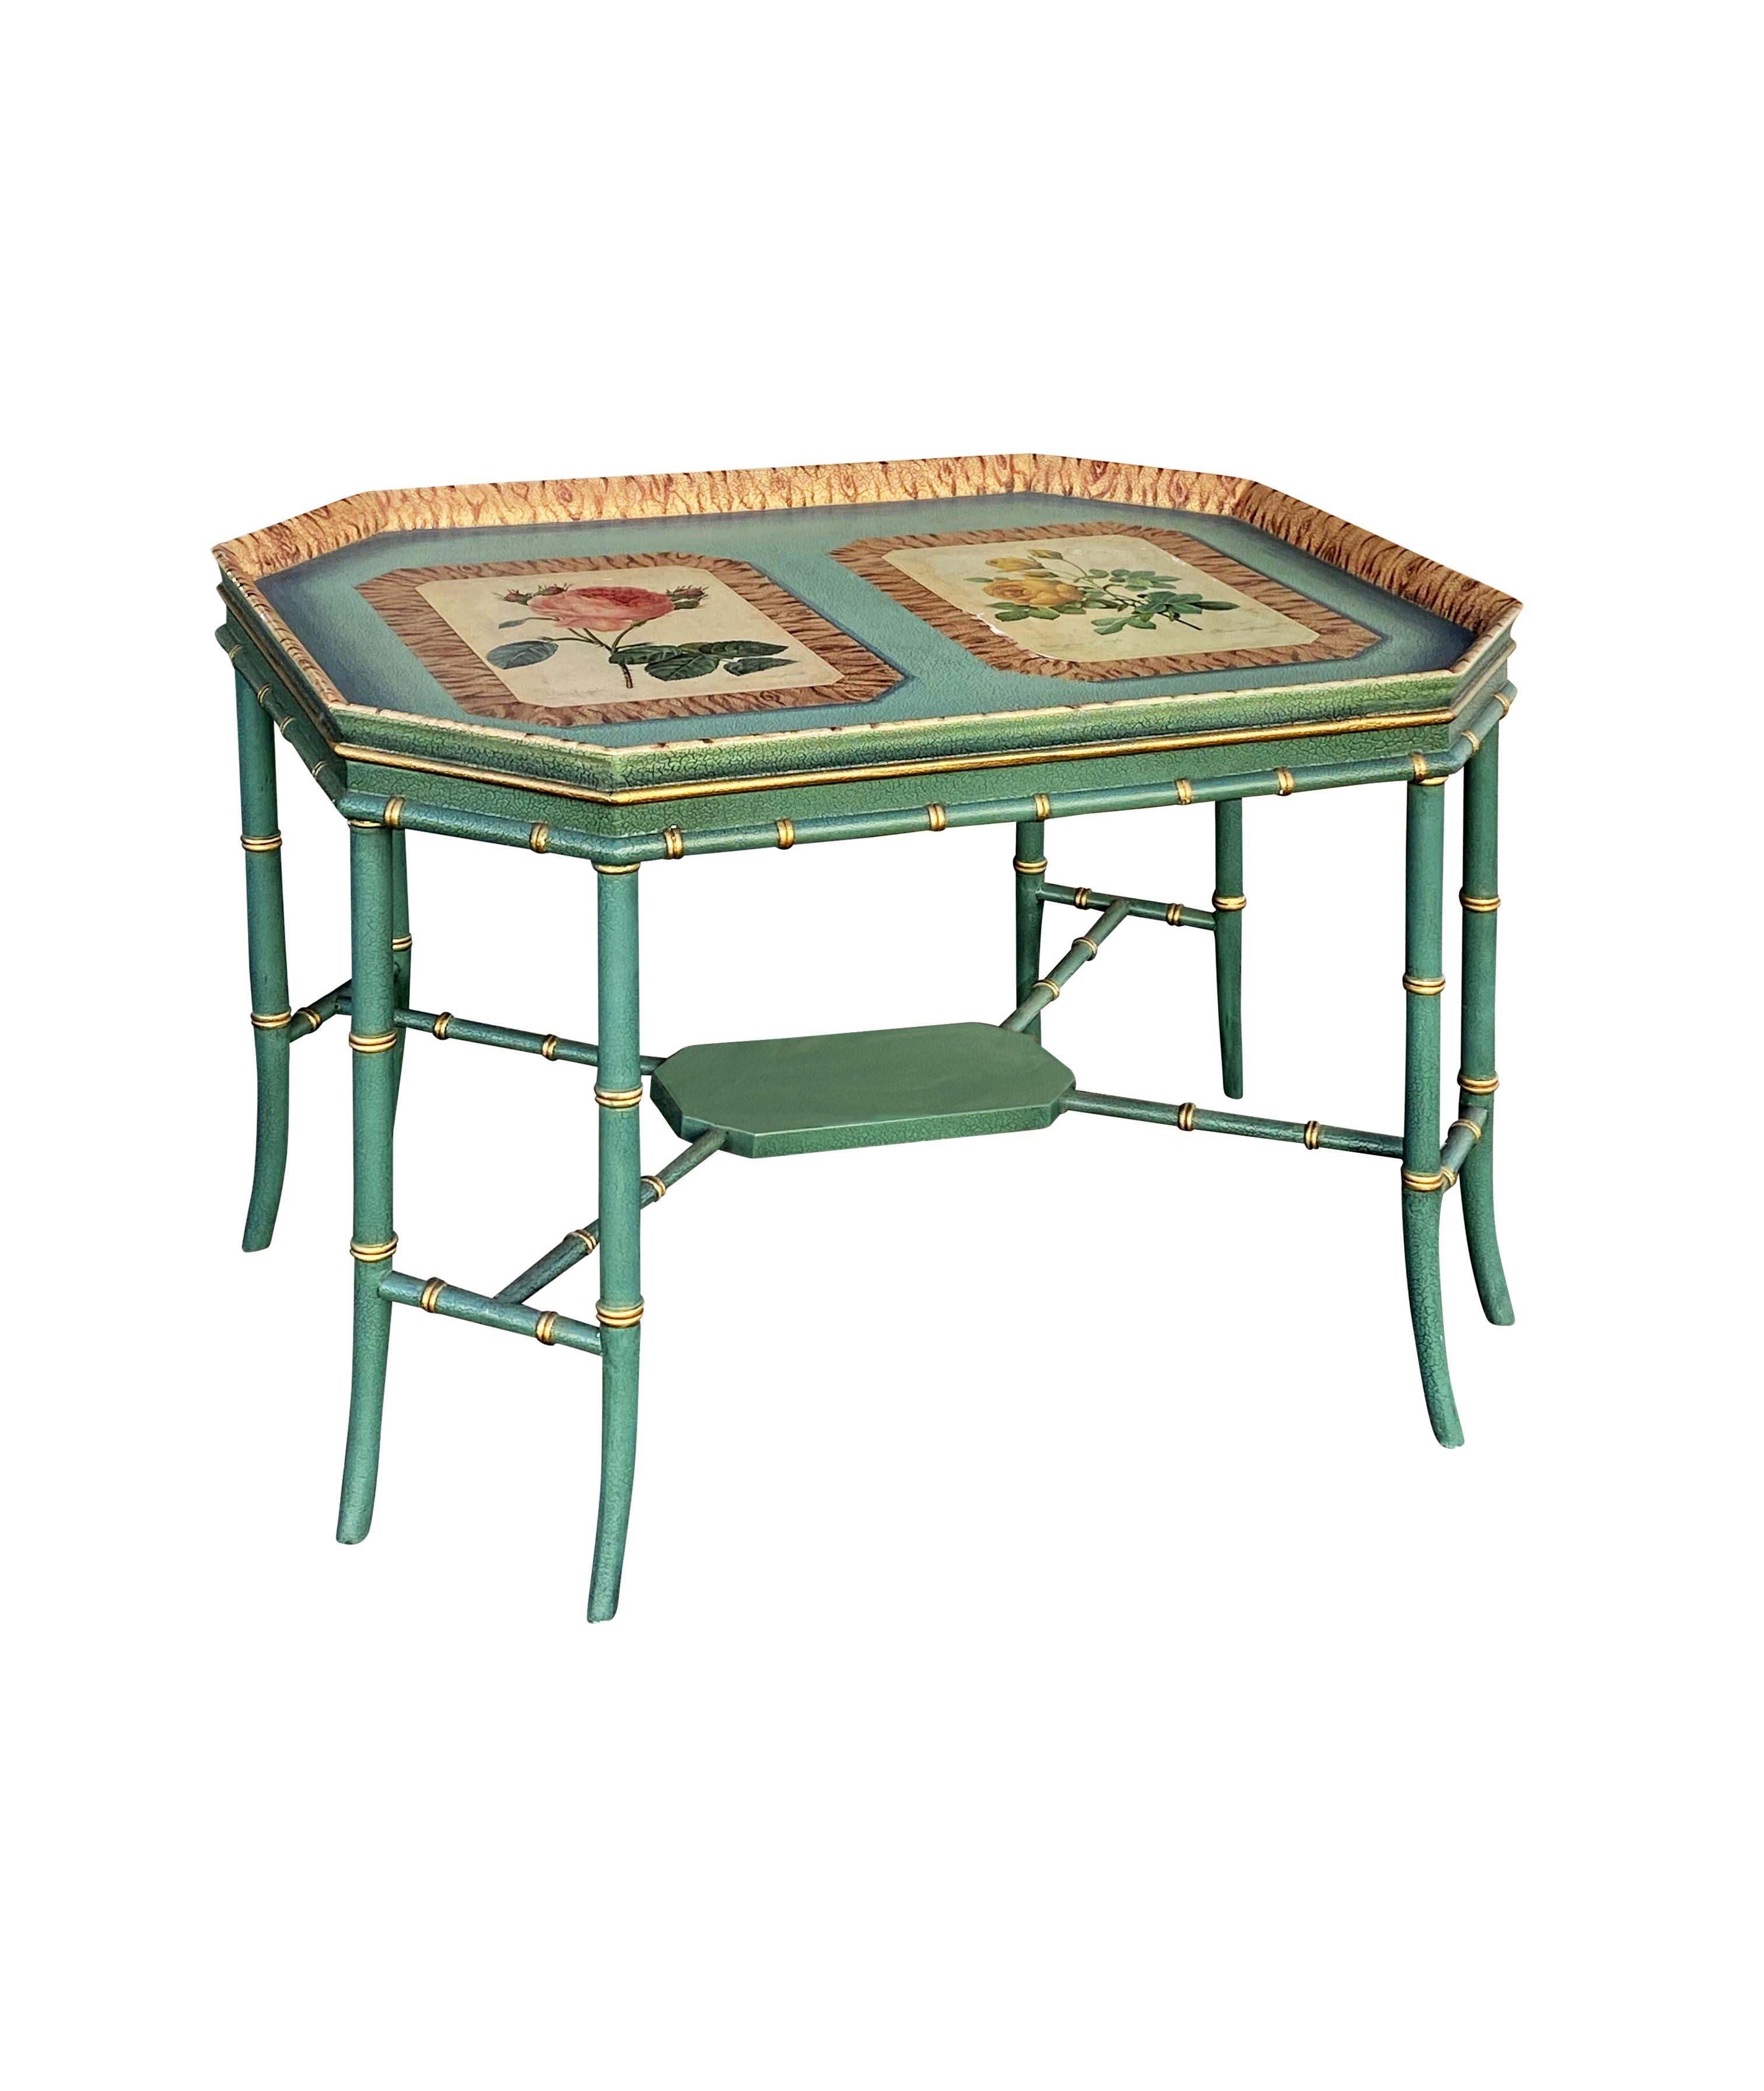 Philippine Maitland Smith Green Hand-Painted Bamboo Gilt Coffee Table